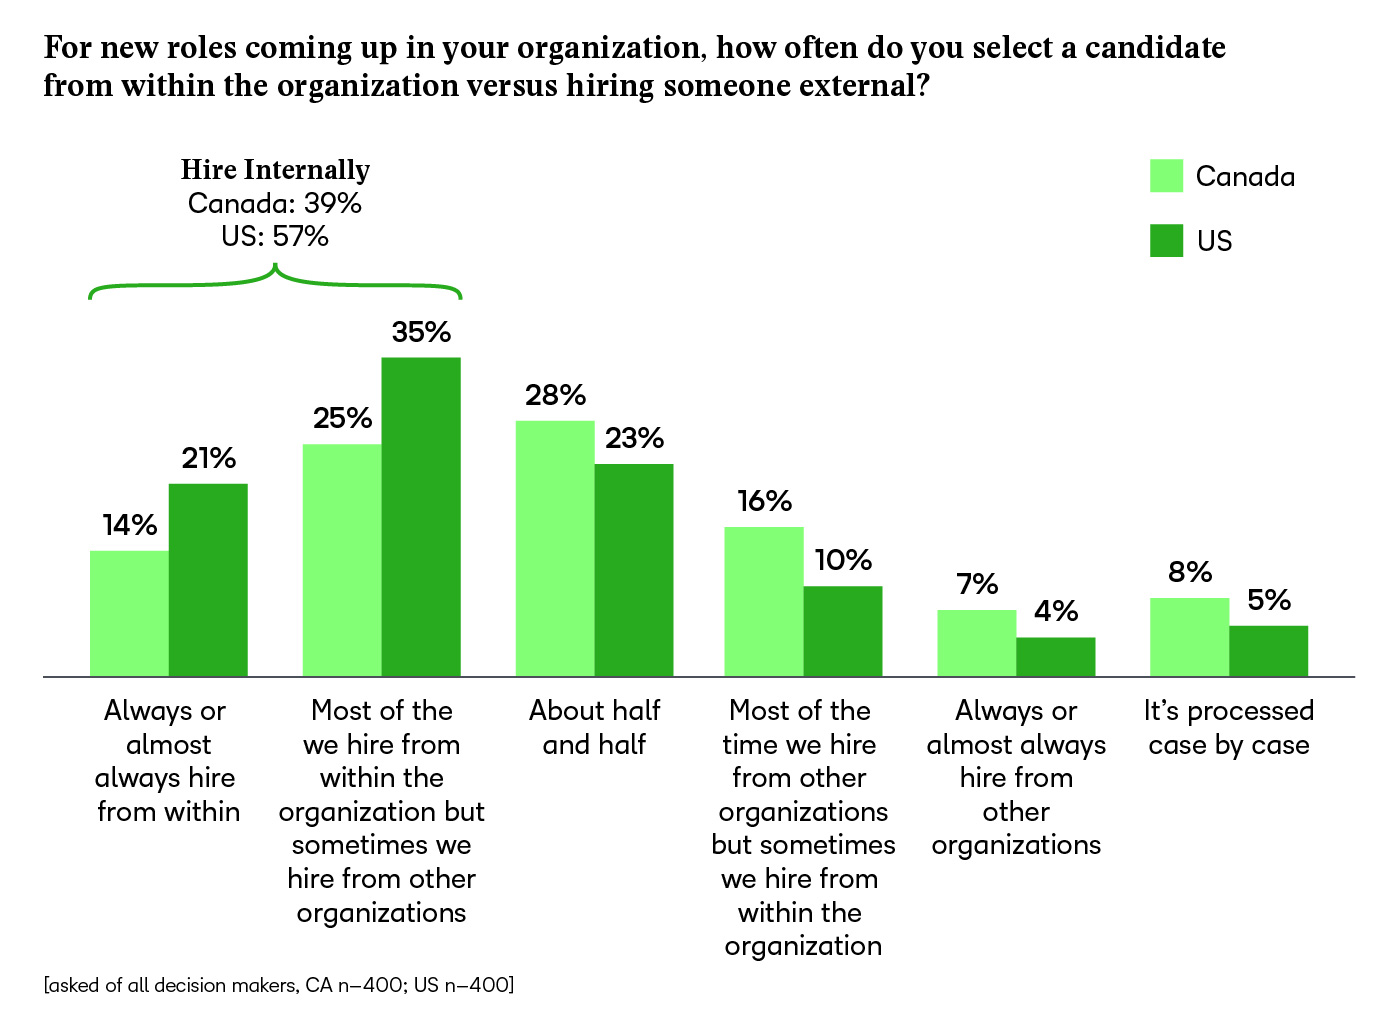 For new roles coming up in your organization, how often do you select a candidate from within the organization versus hiring someone external? The majority hire from within.